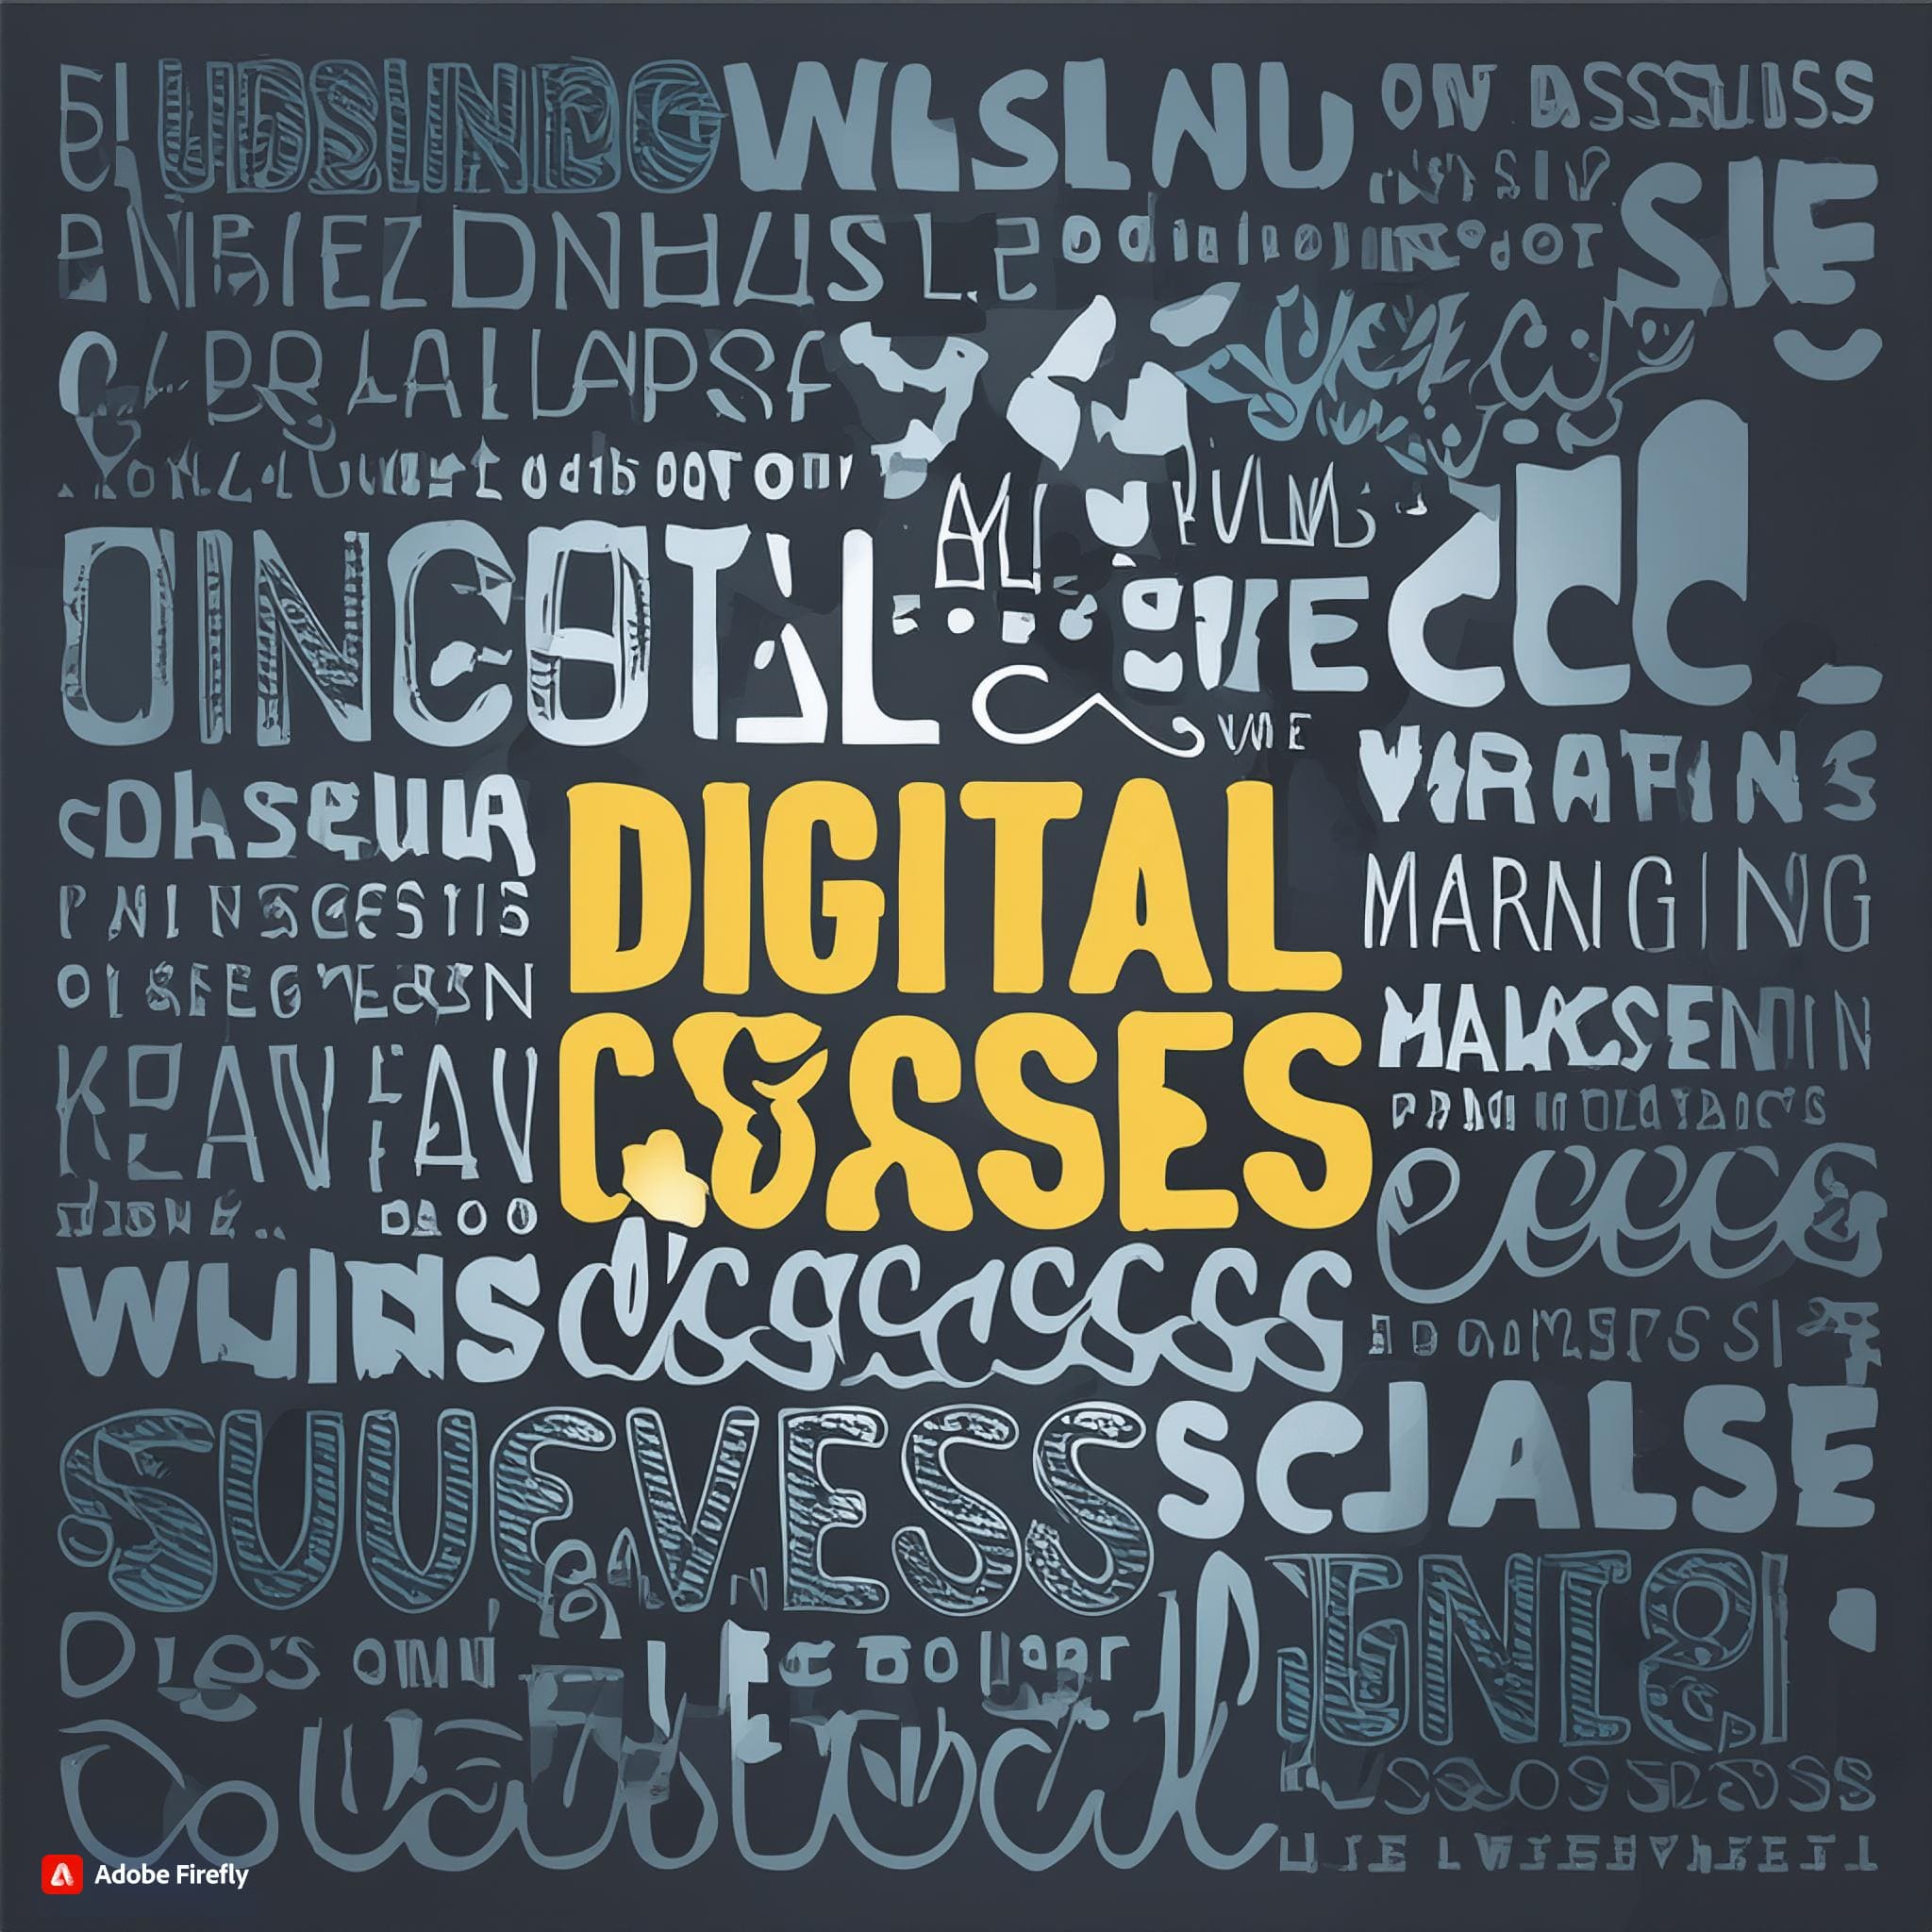 Beyond Basics: Level Up Your Skills with Advanced Digital Marketing Classes